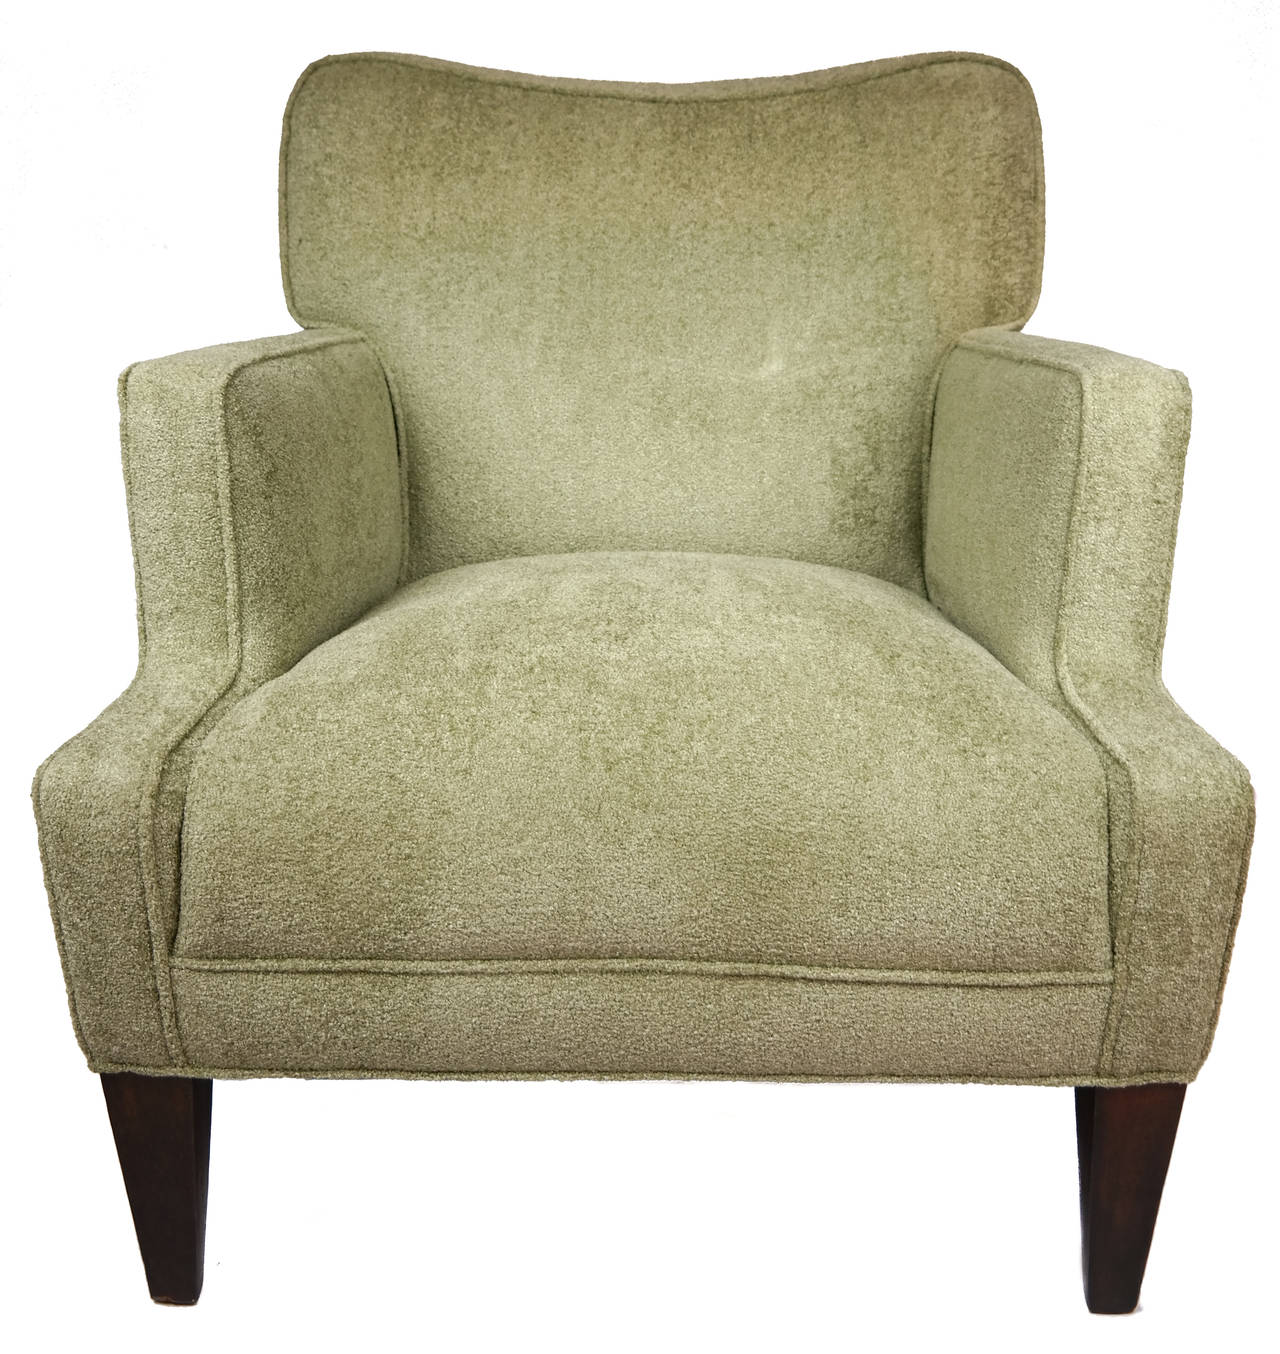 Mid-Century Modern upholstered lounge chair, designed by Edward Wormley (1907-1995), covered in a beautiful sage chenille-type fabric of the highest quality, rising on tapered legs, American, circa 1940s.